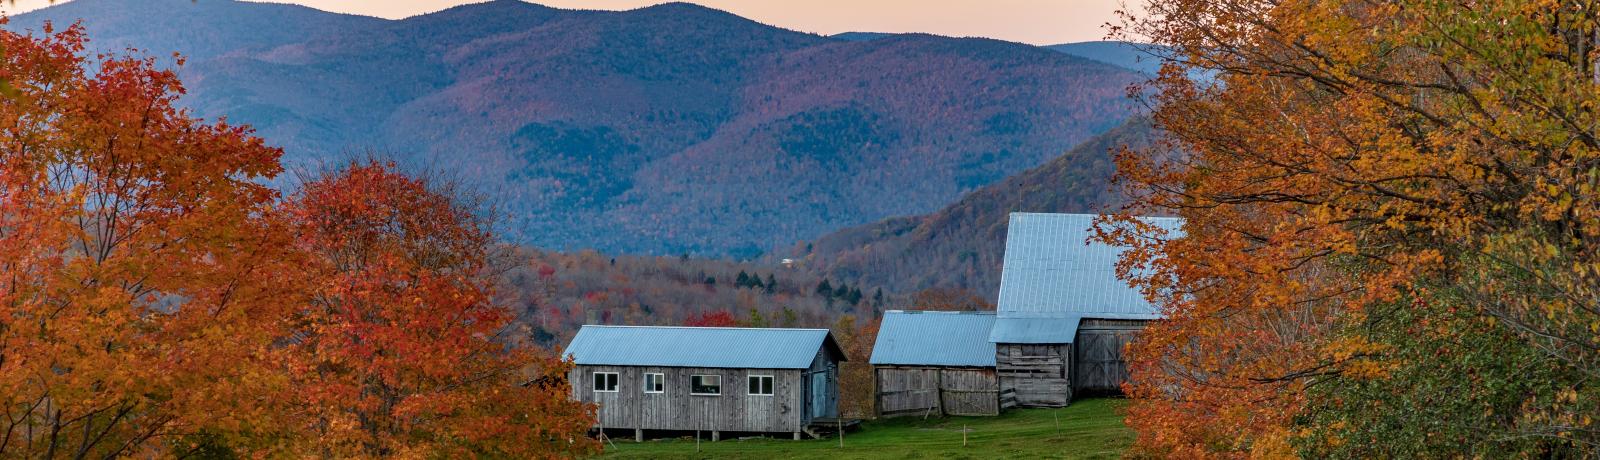 A farm in Rochester, Vermont, during autumn, with a wooden barn and mountains in the background. 